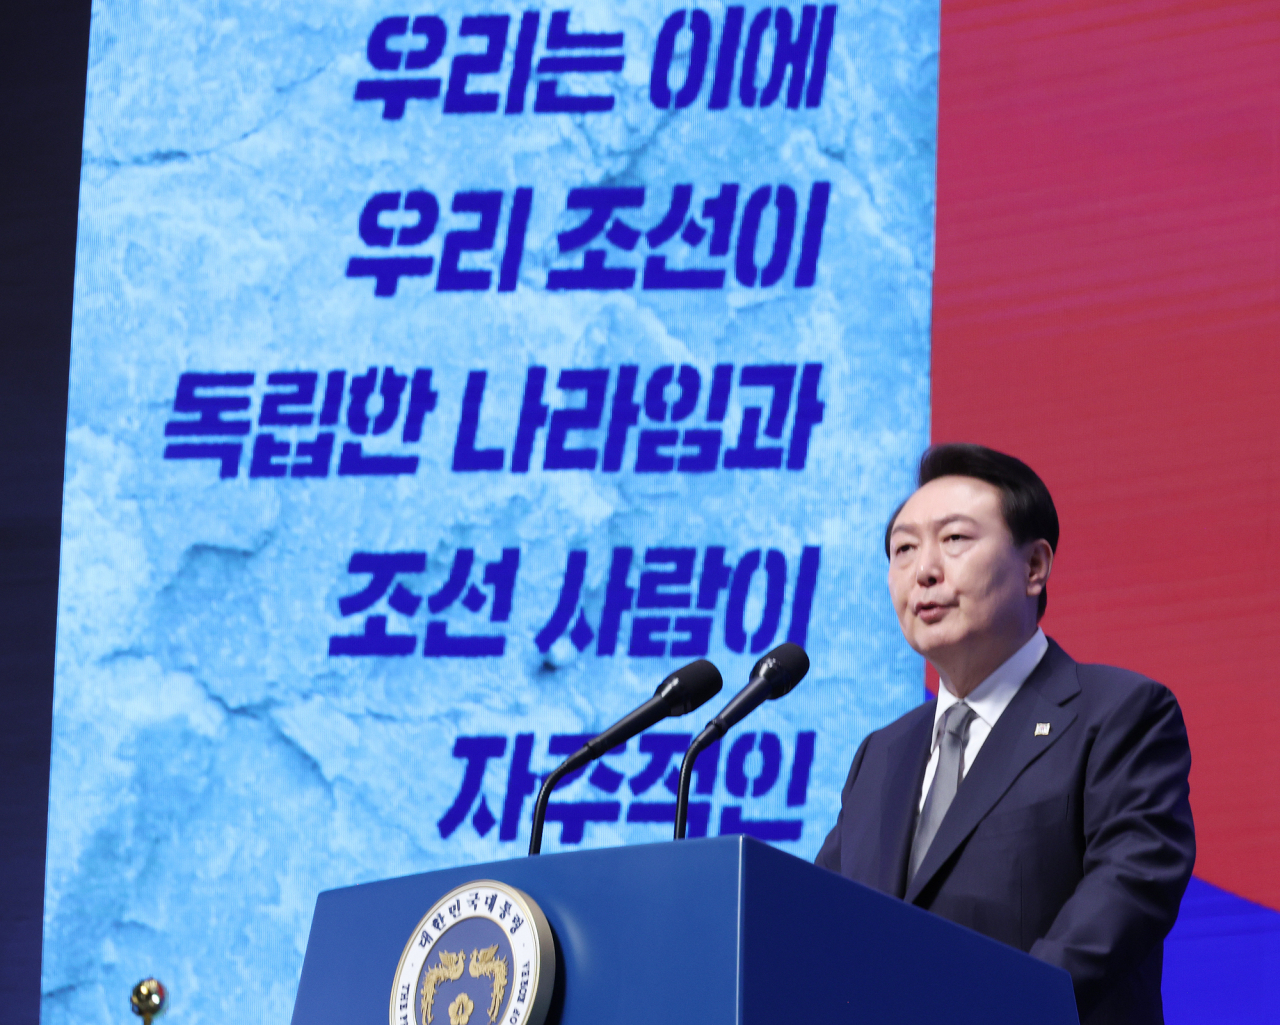 President Yoon Suk Yeol delivers a speech during celebrations of the 104th anniversary of Independence Movement Day in Seoul on Wednesday. (Yonhap)